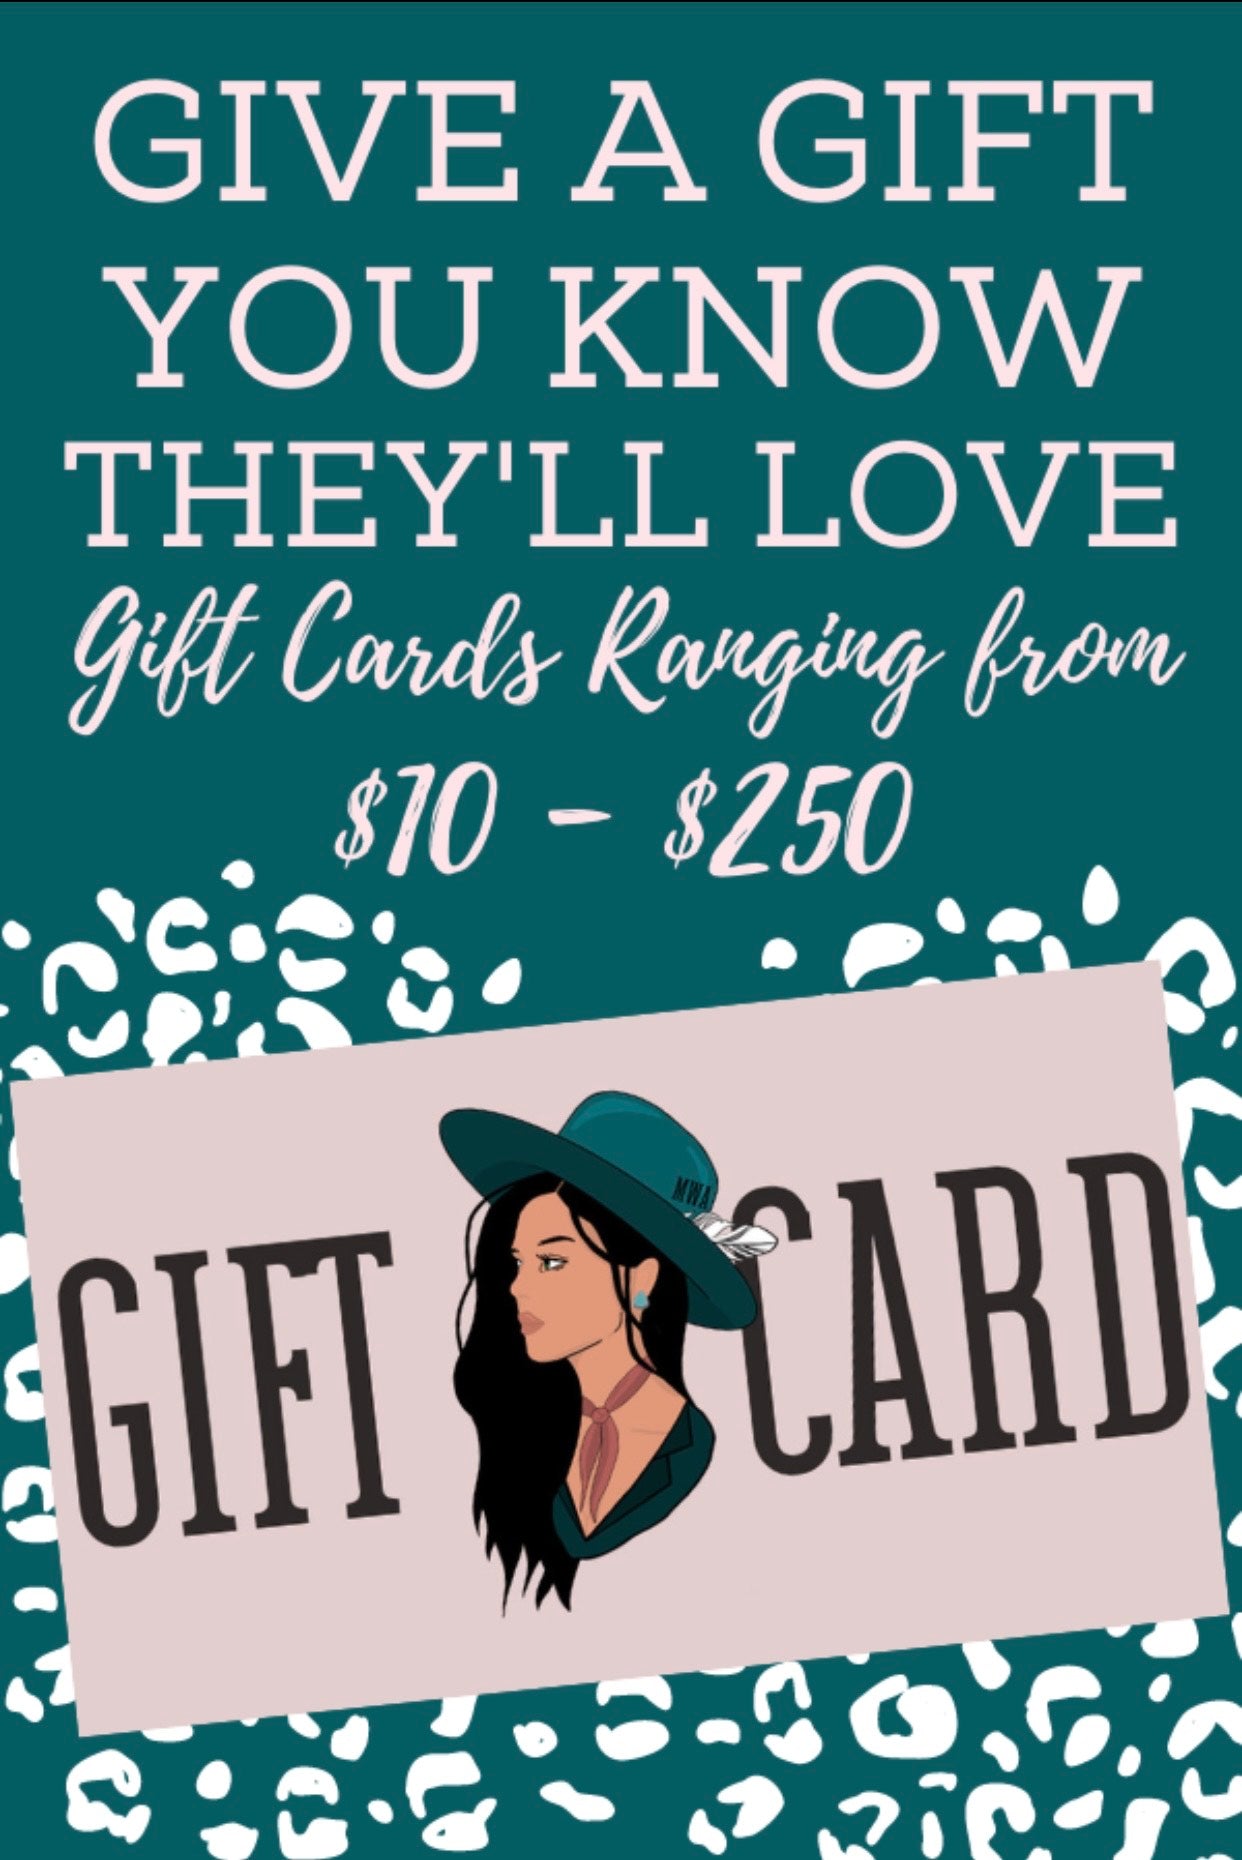 Middle West Apparel Gift Card - Middle West Apparel